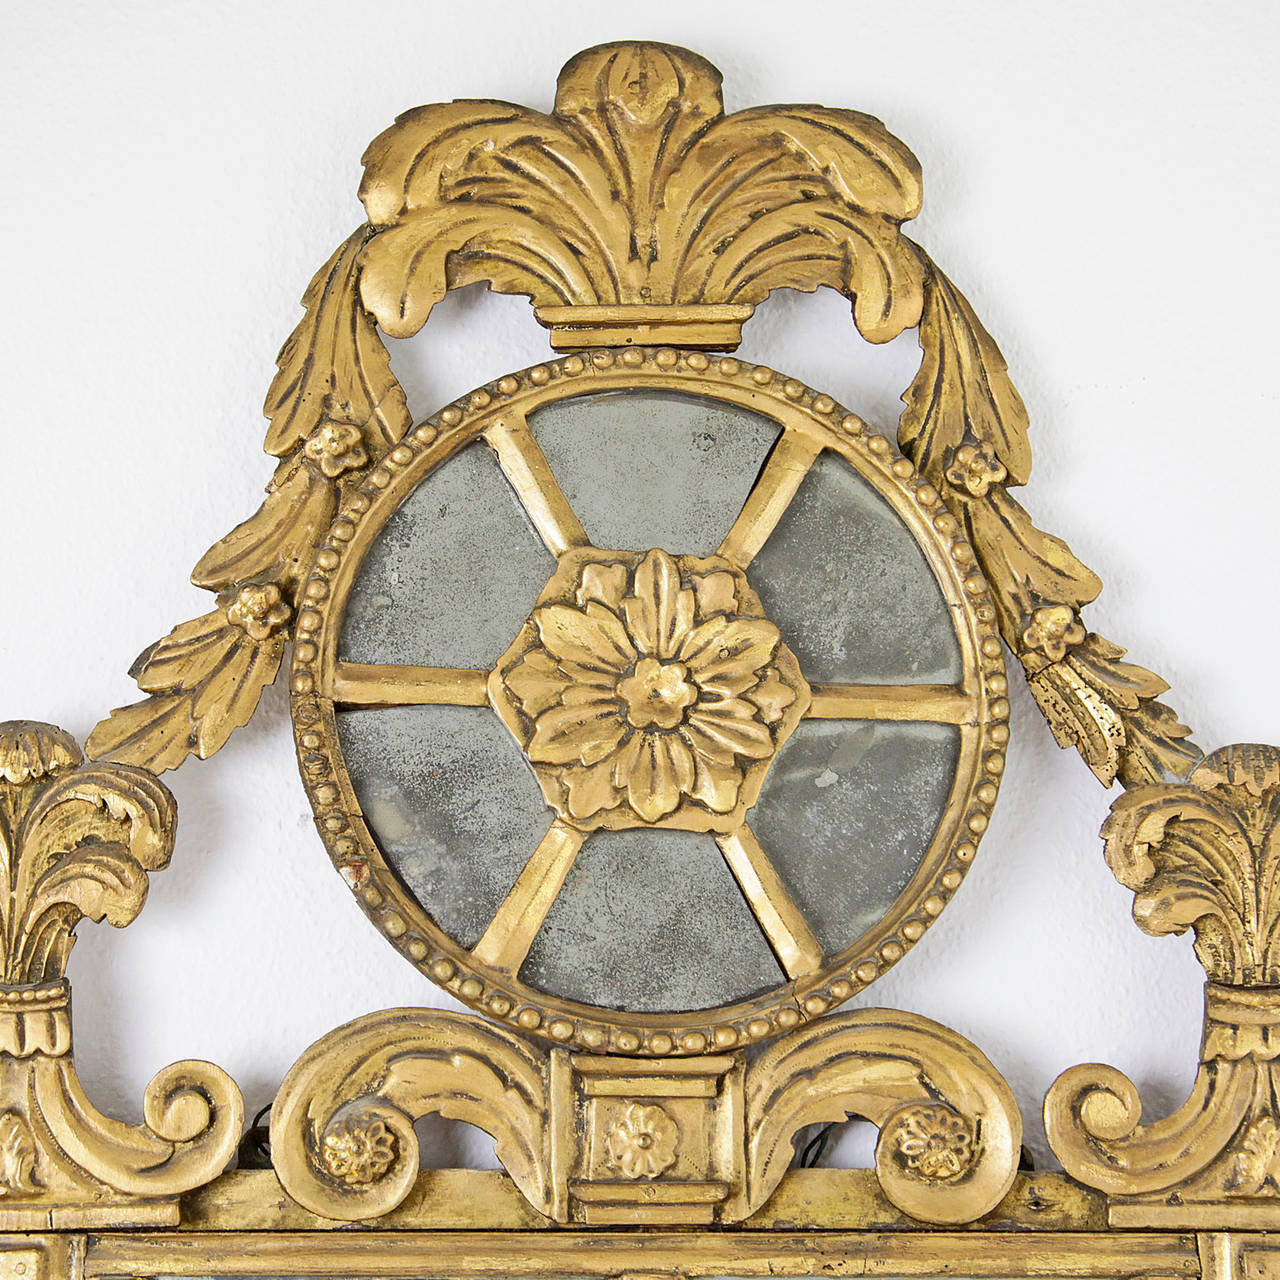 Fantastic italian Mirror, dating from the 18th Century.
Wood carved and gilded.